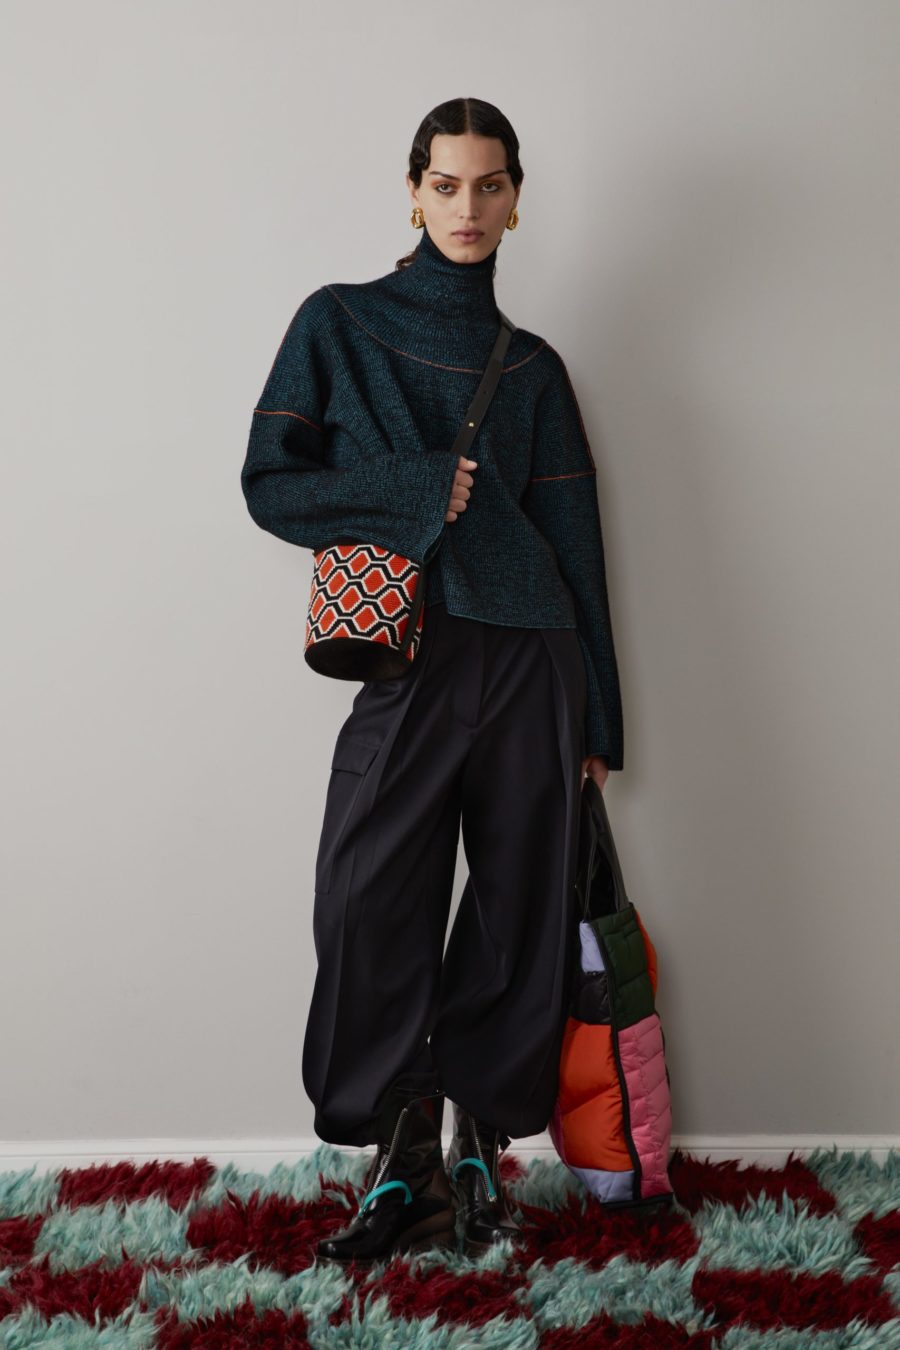 AW22 Colville. Teal turtleneck with print bag. with Multi-color bag. The fashion stalwarts, Lucinda Chambers and Molly Molloy of Colville, on crafting thoughtful, eclectic pieces designed to make an impact.